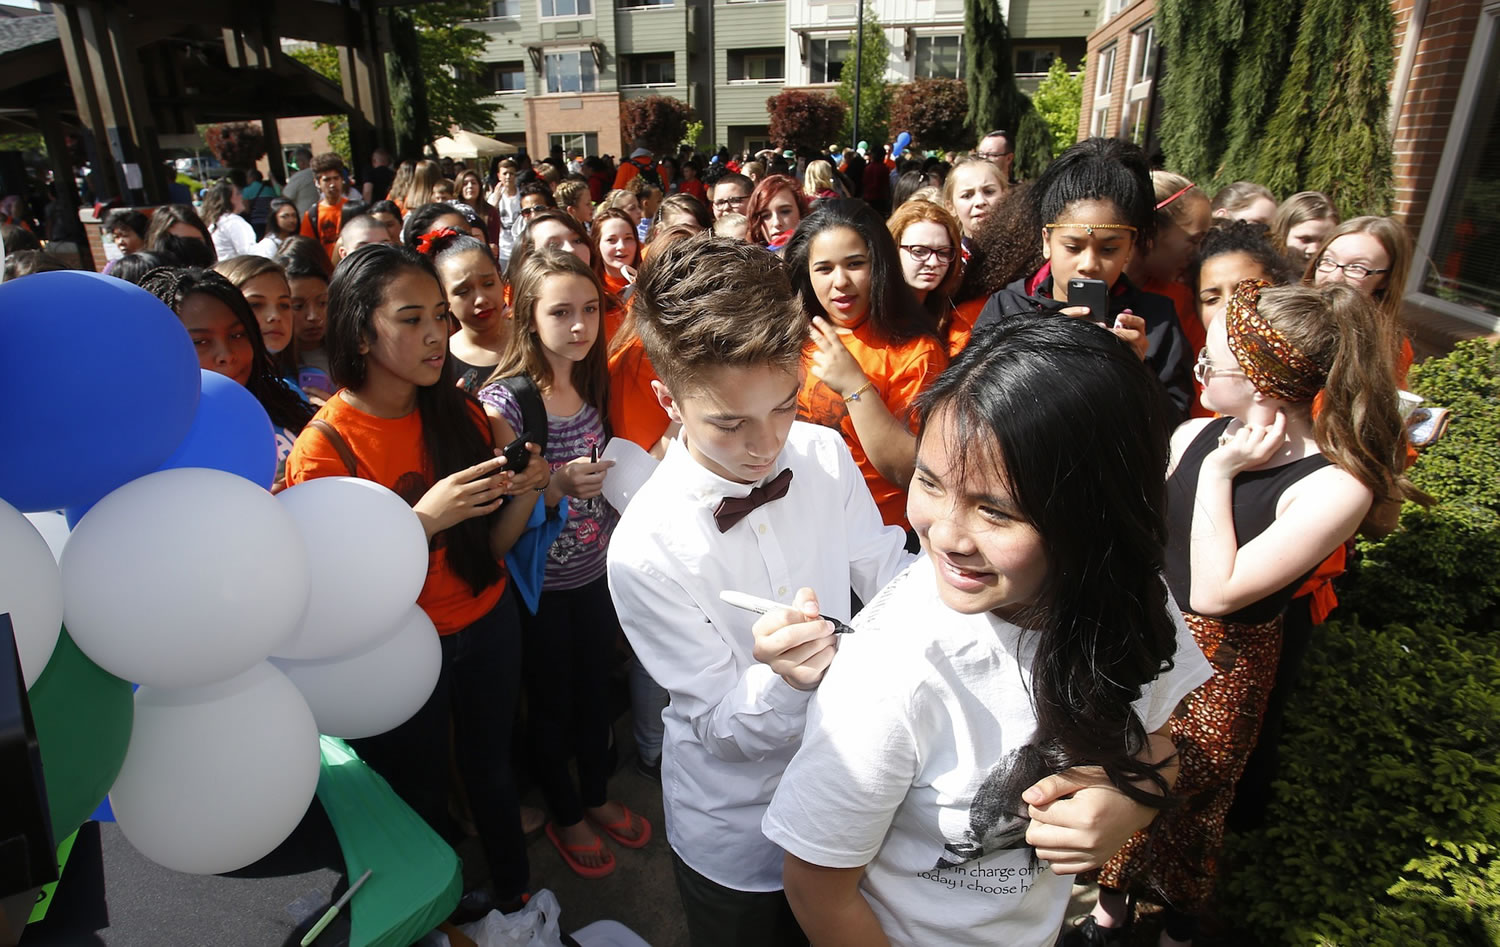 Daniel Seavey, &quot;American Idol&quot; contestant, signs autographs for fans at a cancer research fundraiser for St. Baldrick's Foundation Friday at The Quarry Senior Living in Vancouver.